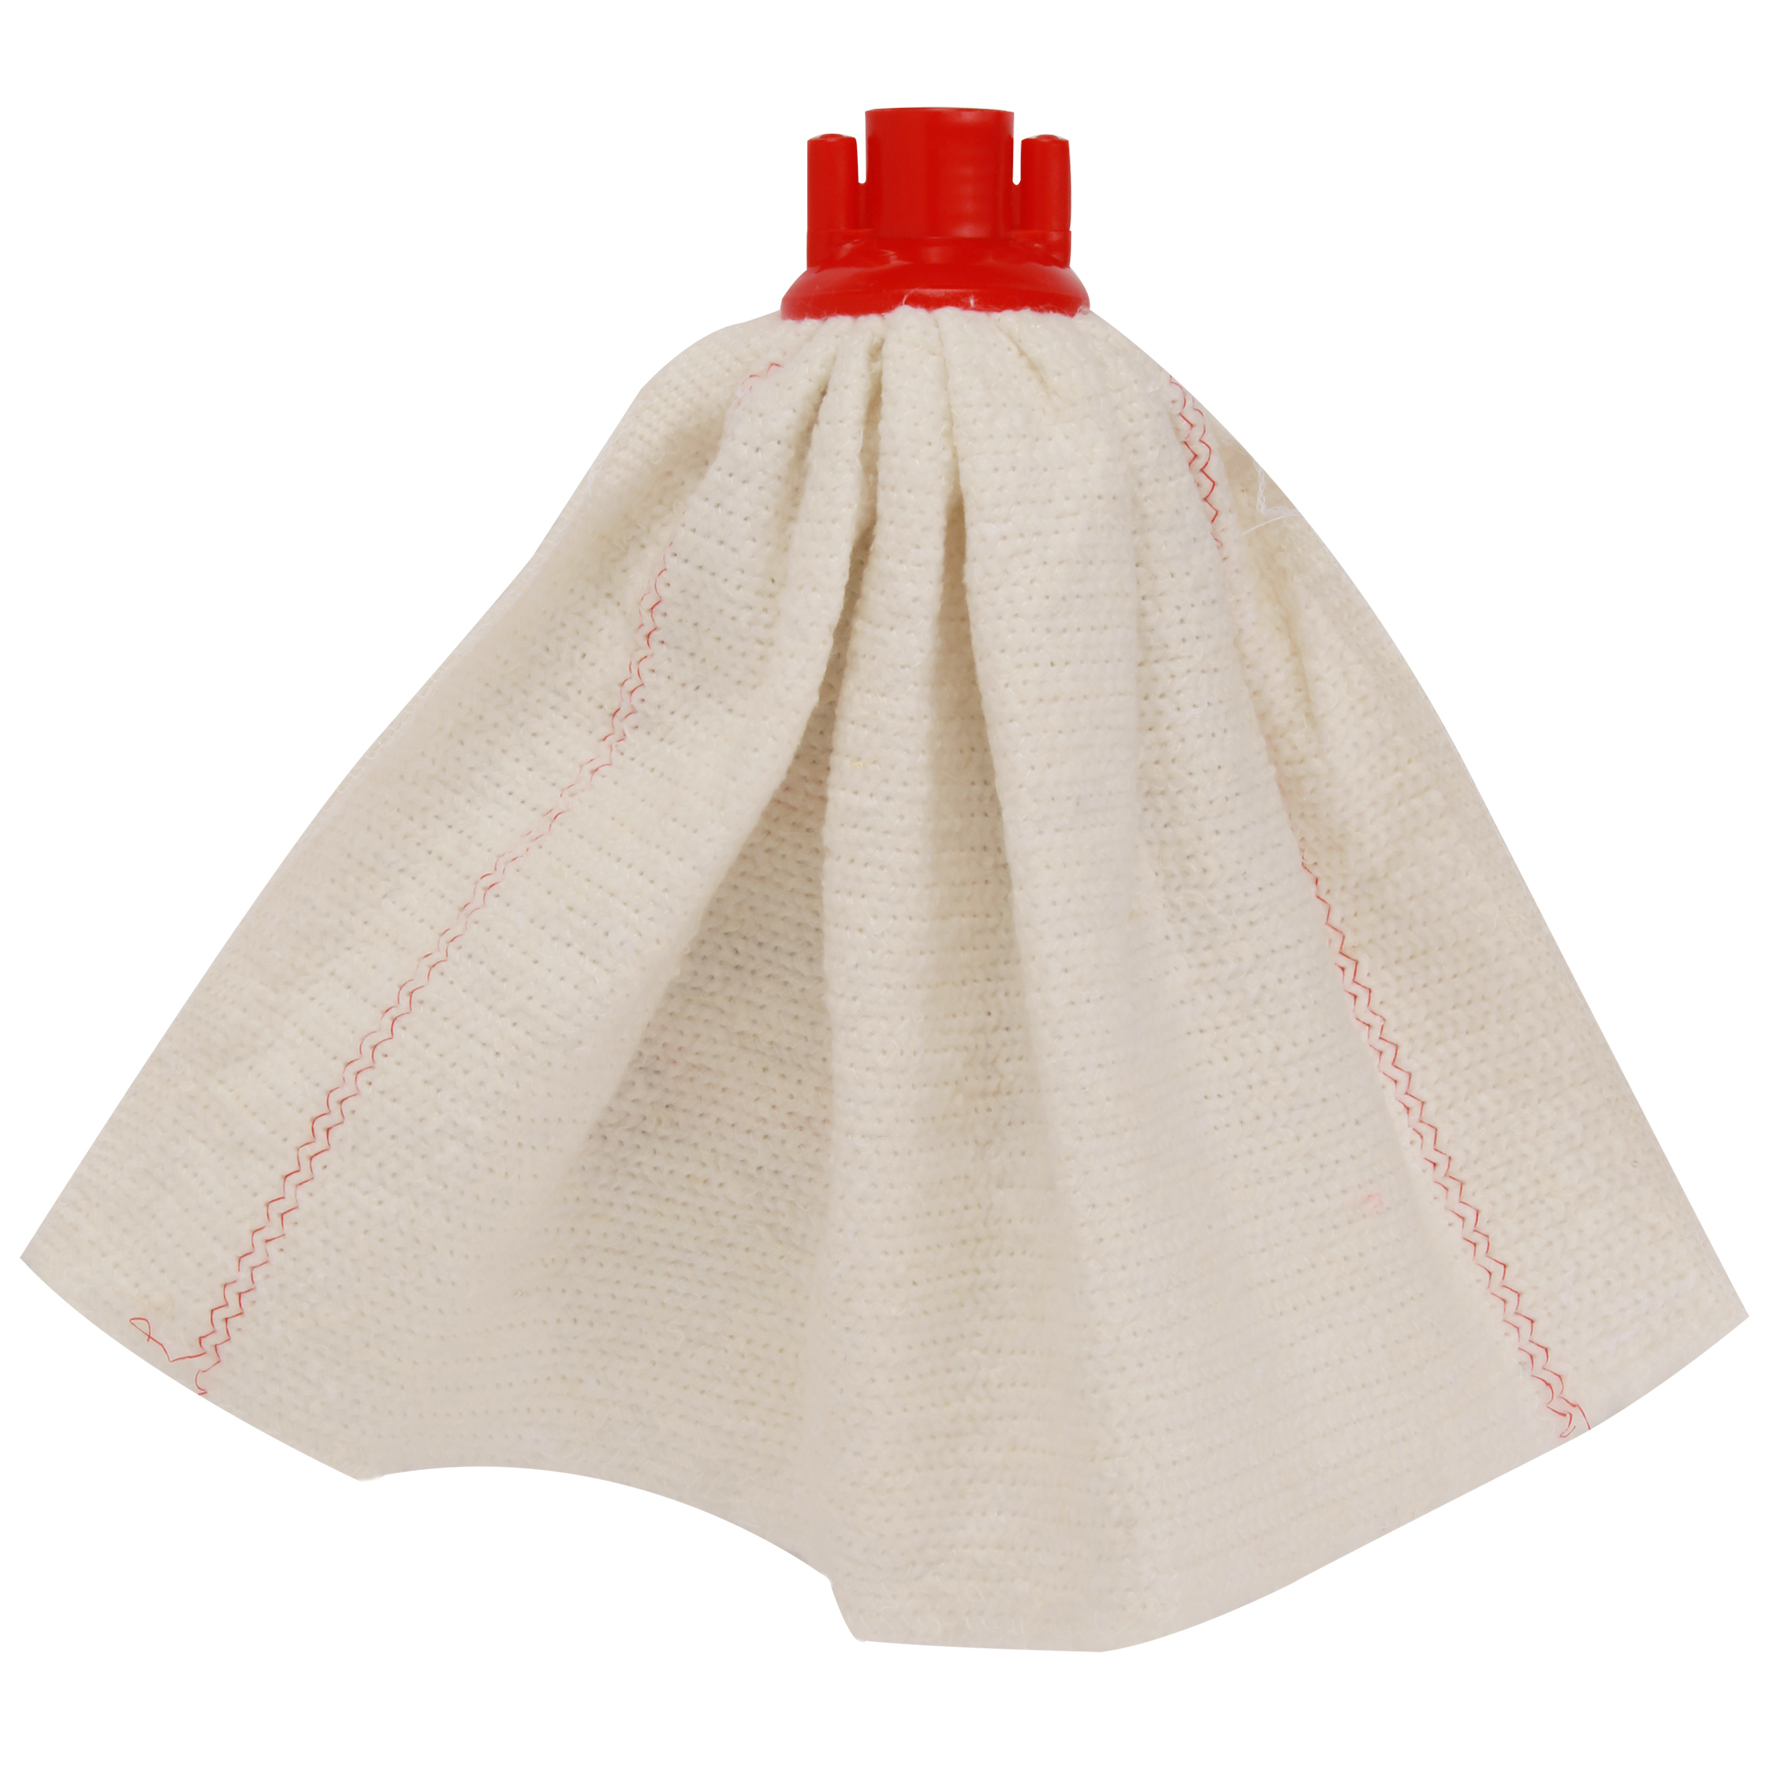 Household mop, “skirt” type 100% cotton, white color